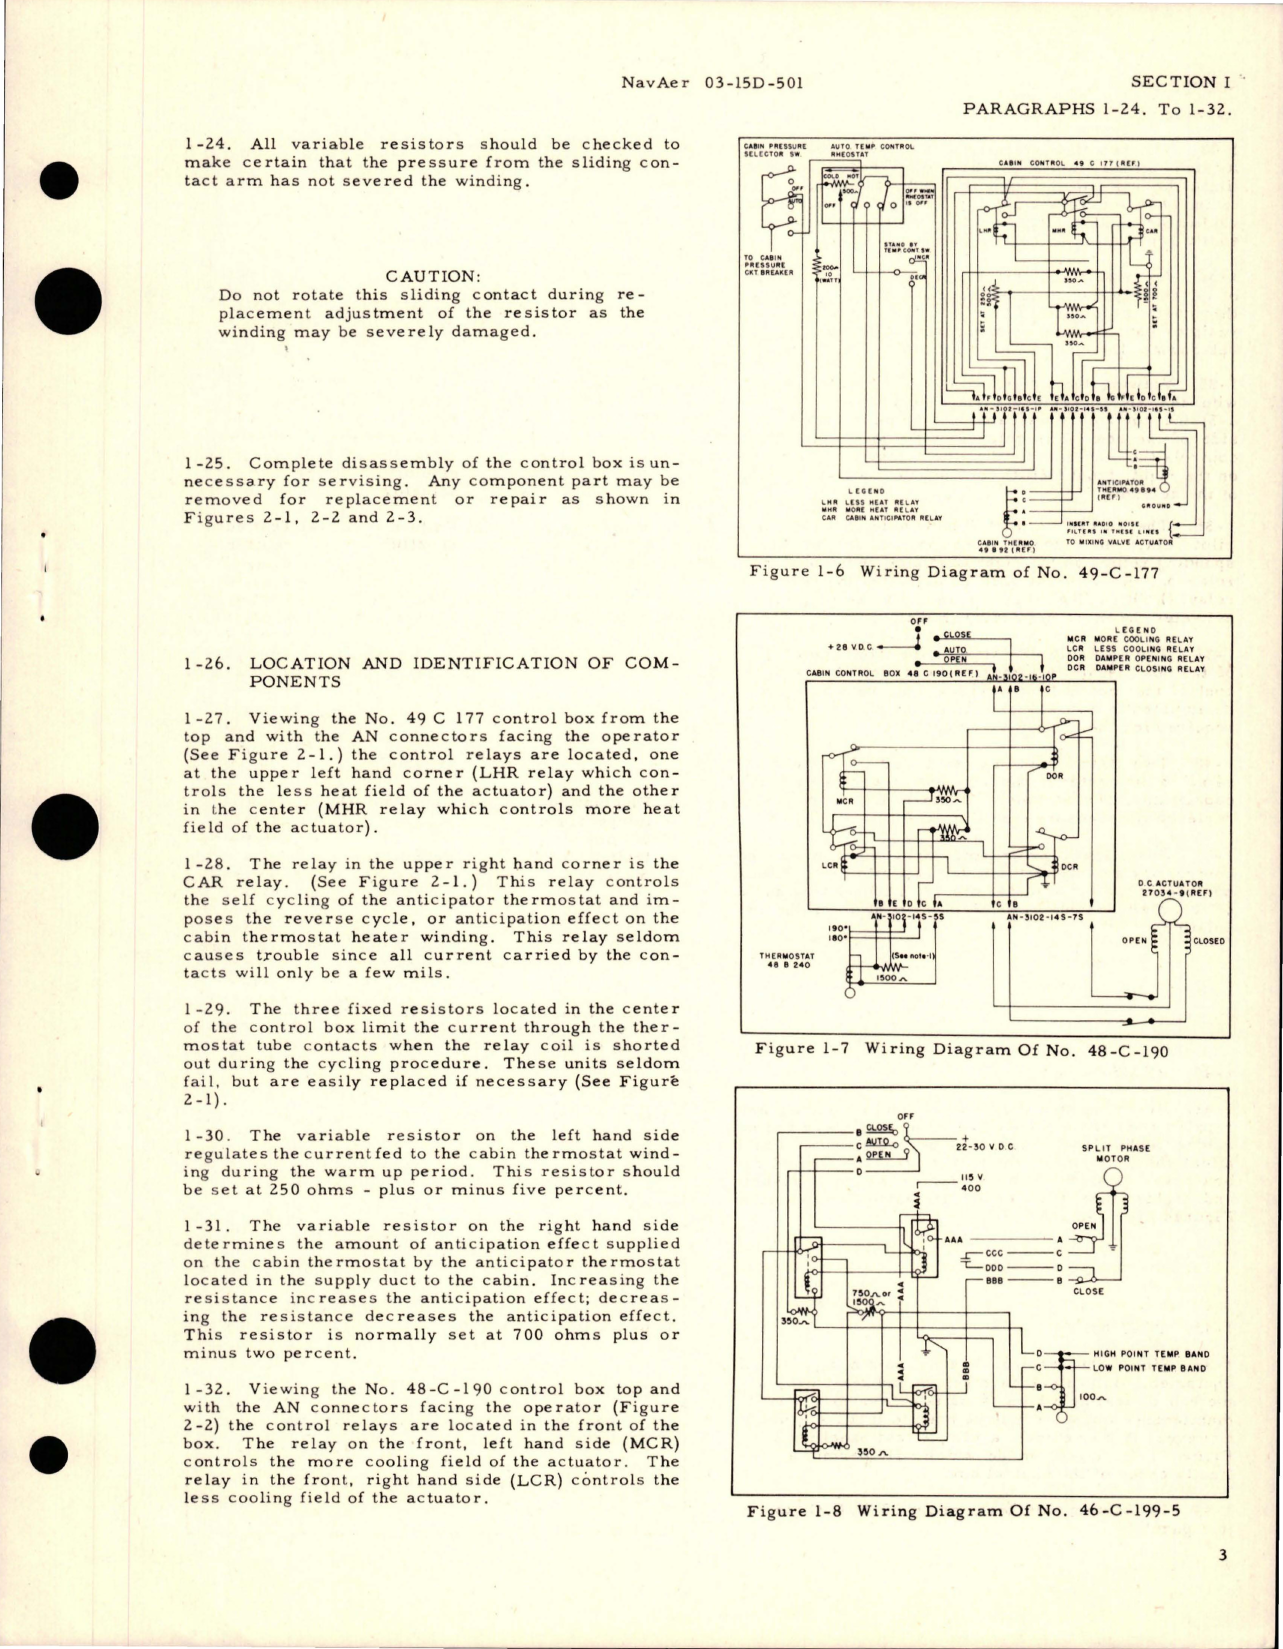 Sample page 5 from AirCorps Library document: Overhaul Instructions with Parts Catalog for Control Boxes - Parts 49-C-177, 48-C-190, 46-C-199-5